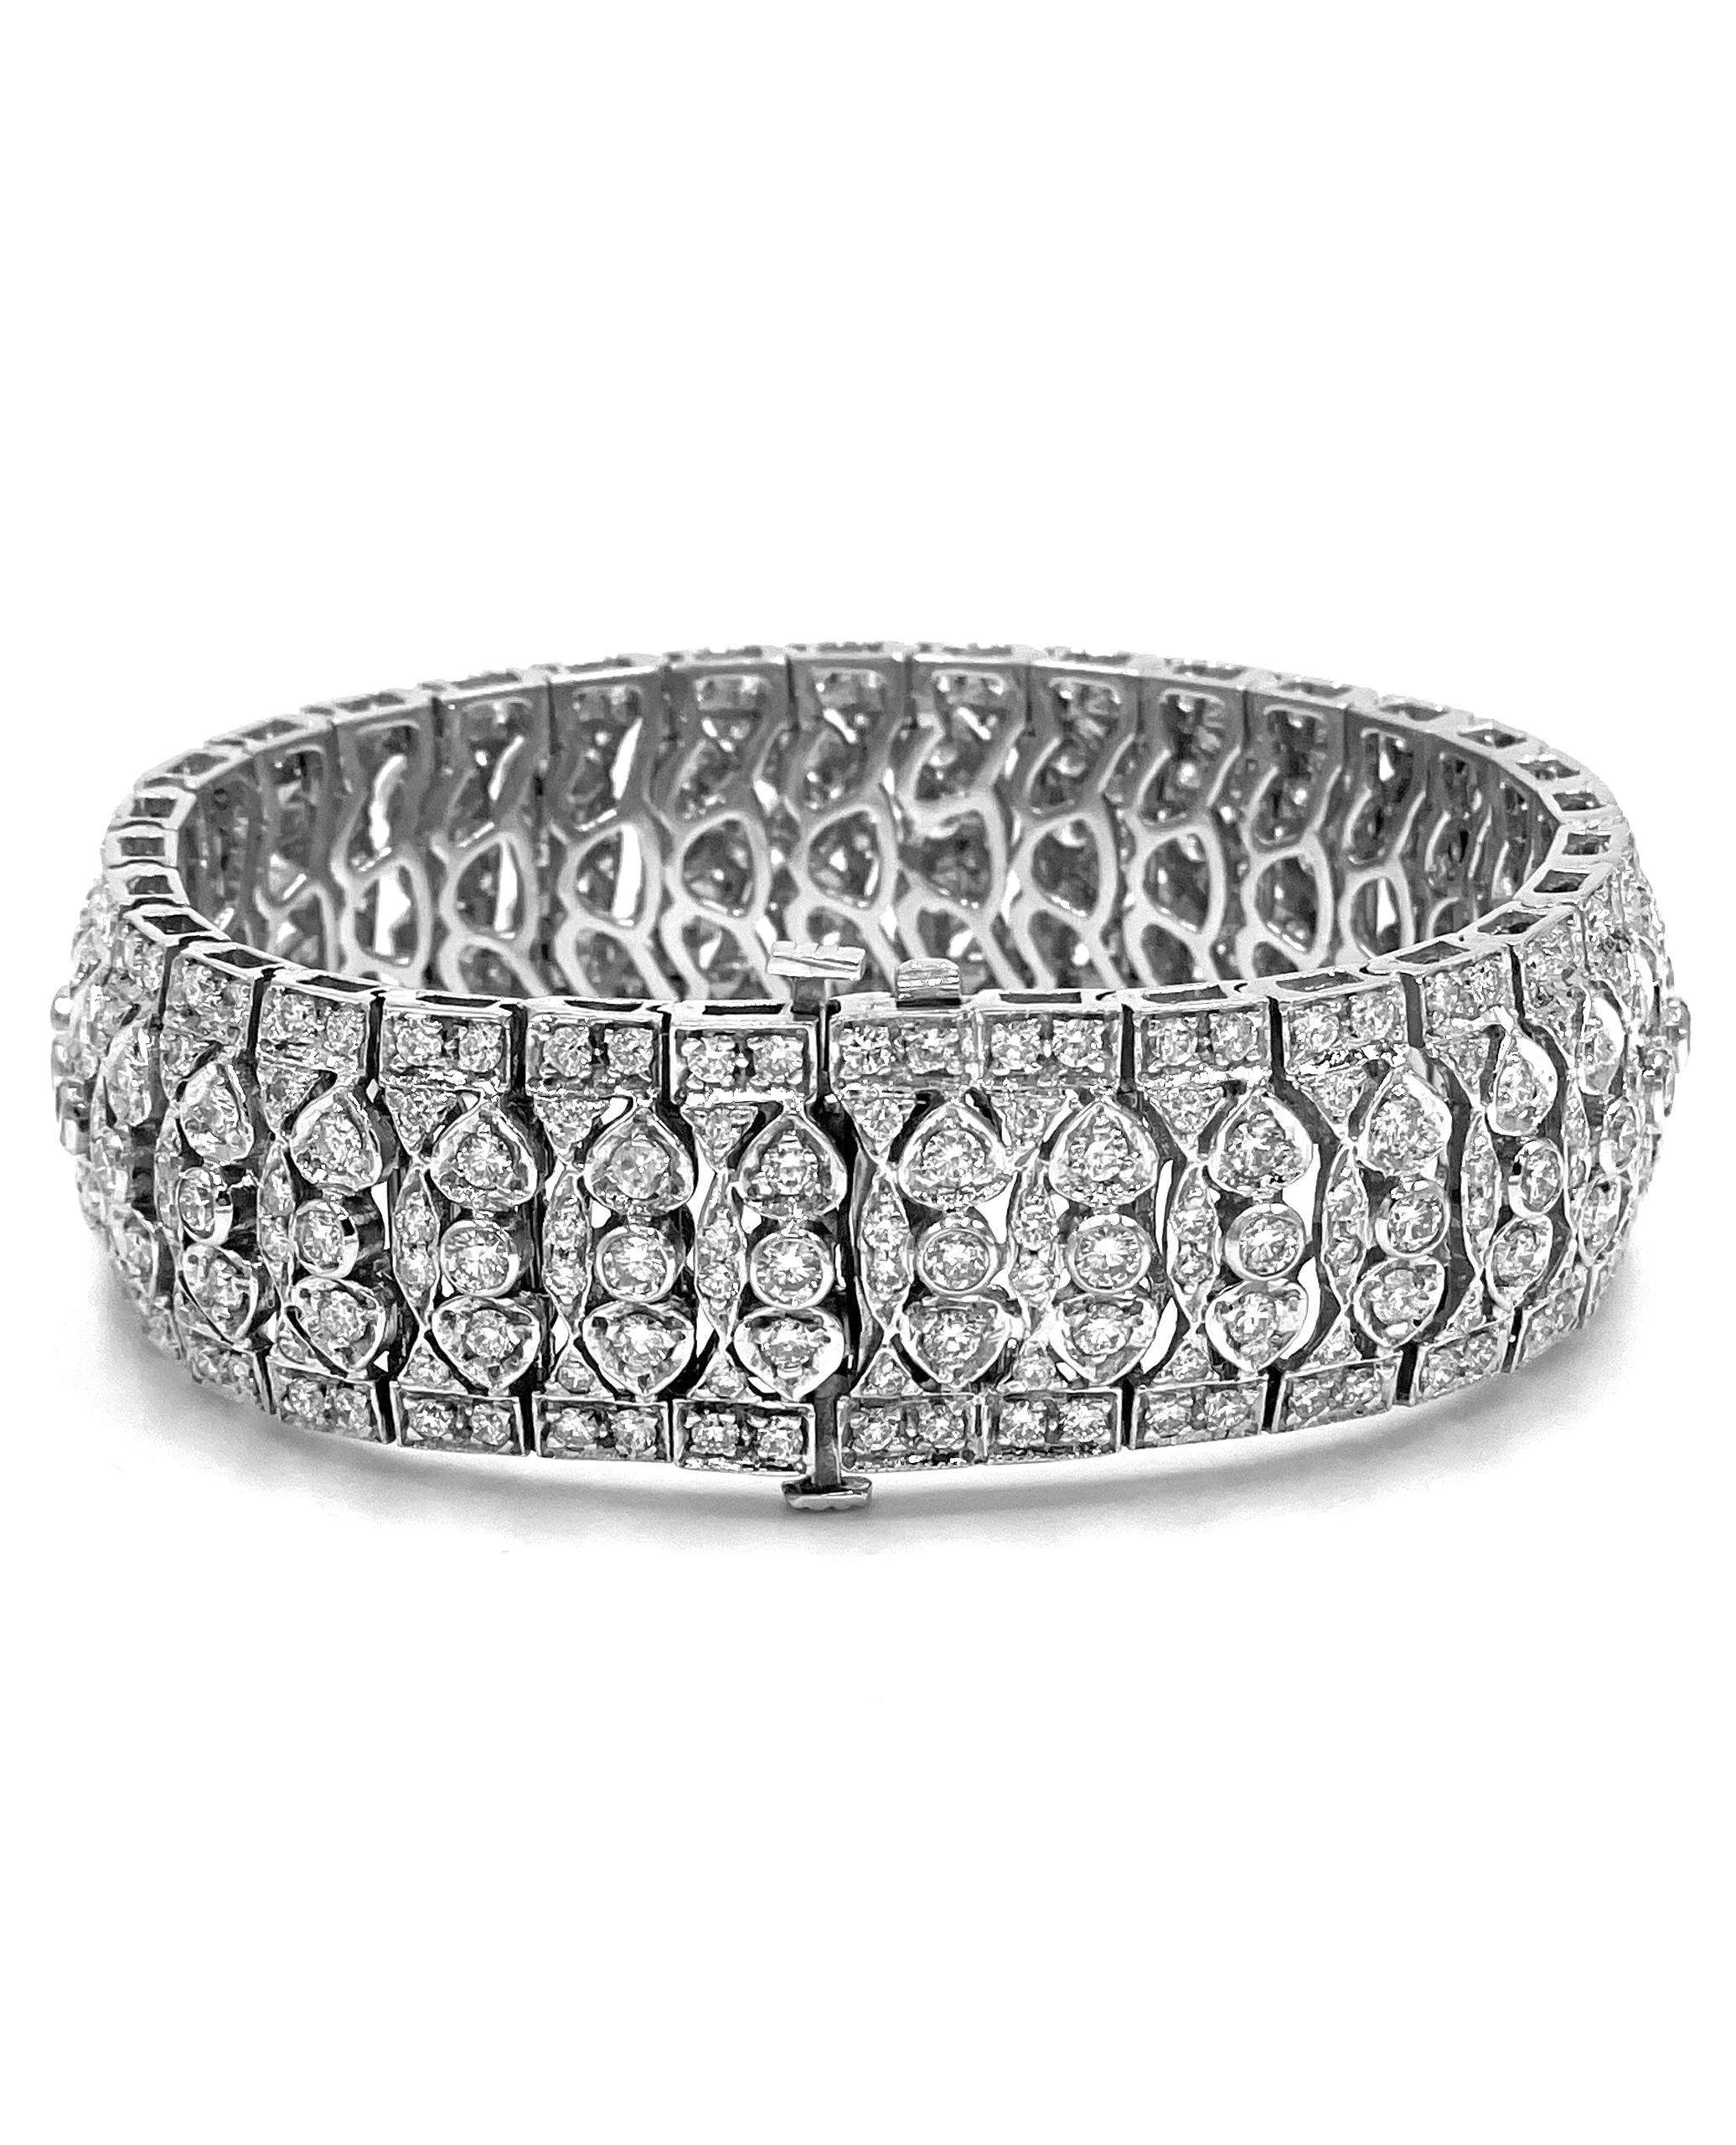 Vintage style with a modern flare, this 18K white gold bracelet features 352 round brilliant-cut diamonds with a total weight of 13.0 carats.  

* Length: 7.25 inches long
* 18.6mm wide
* Diamonds are G/H color, VS2/SI1 clarity.
* Diamonds are pave